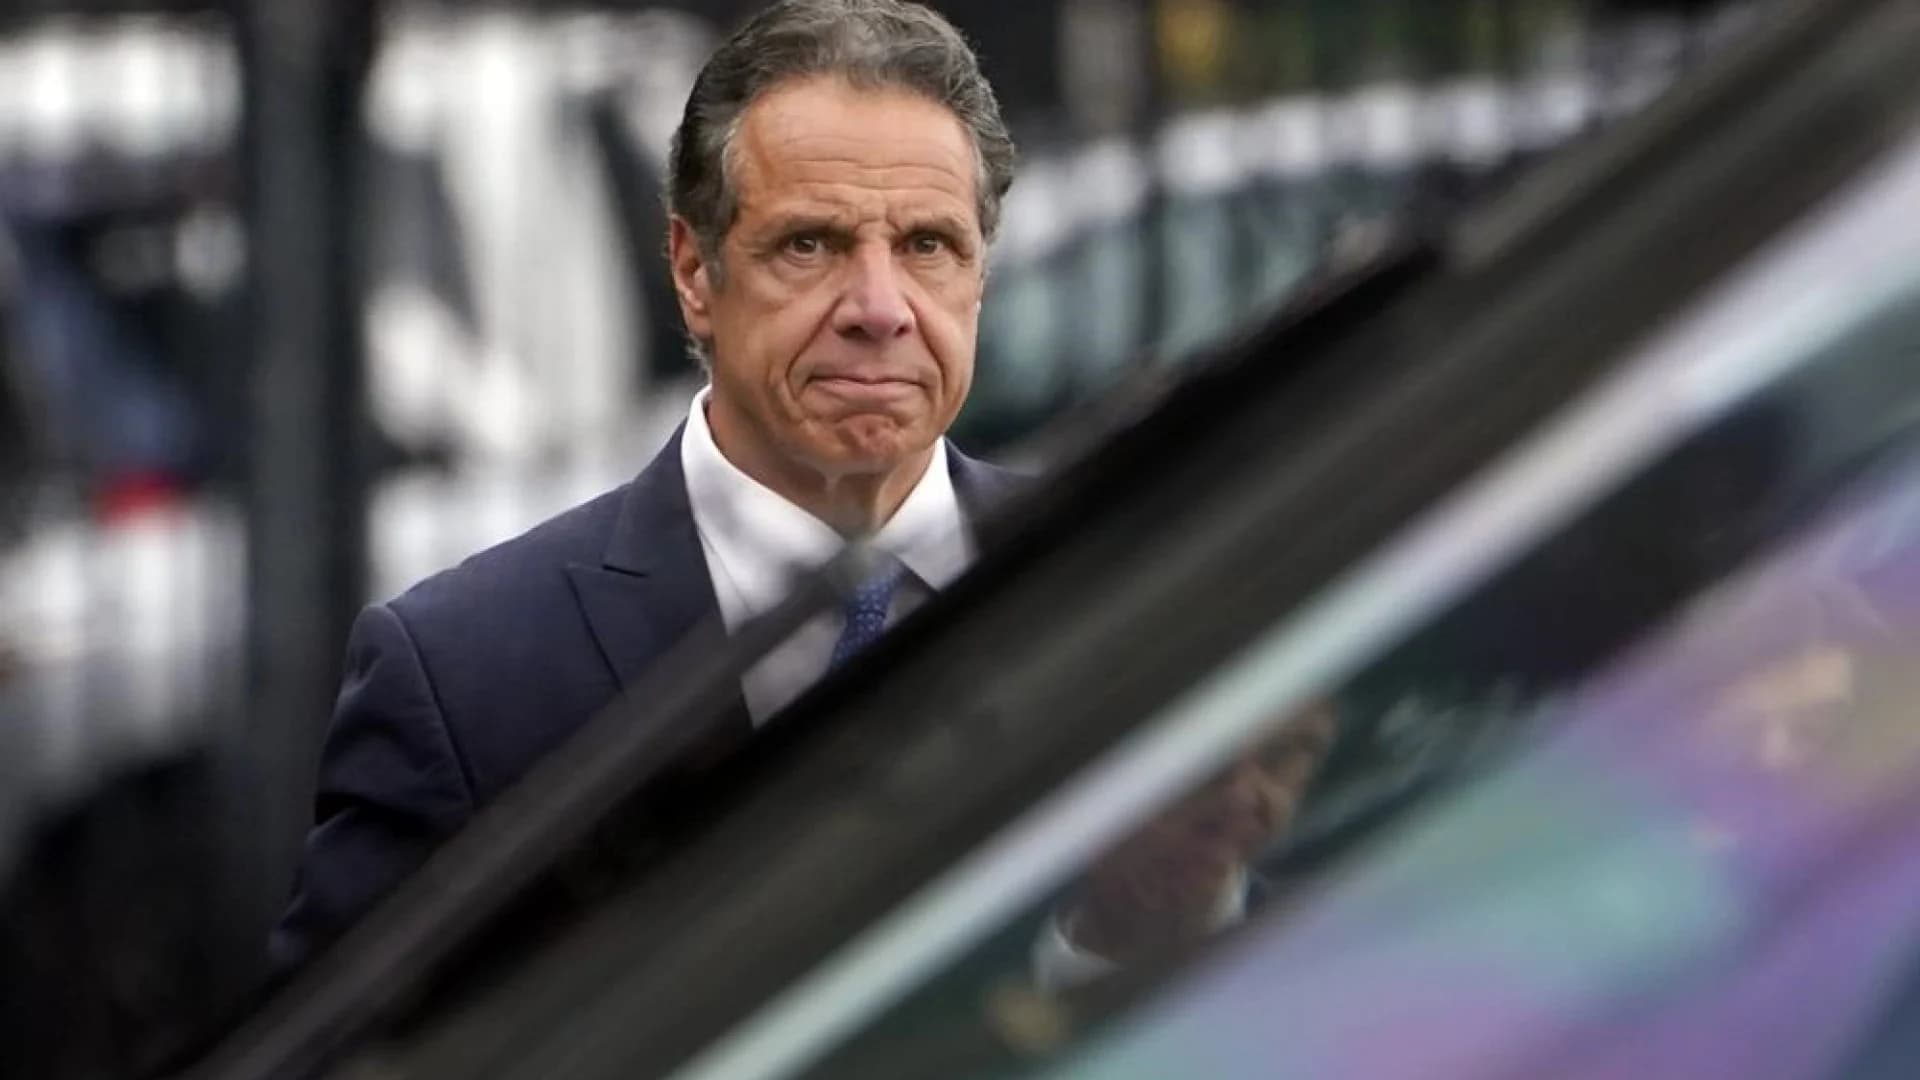 Cuomo exit isn’t stopping push for answers on nursing homes